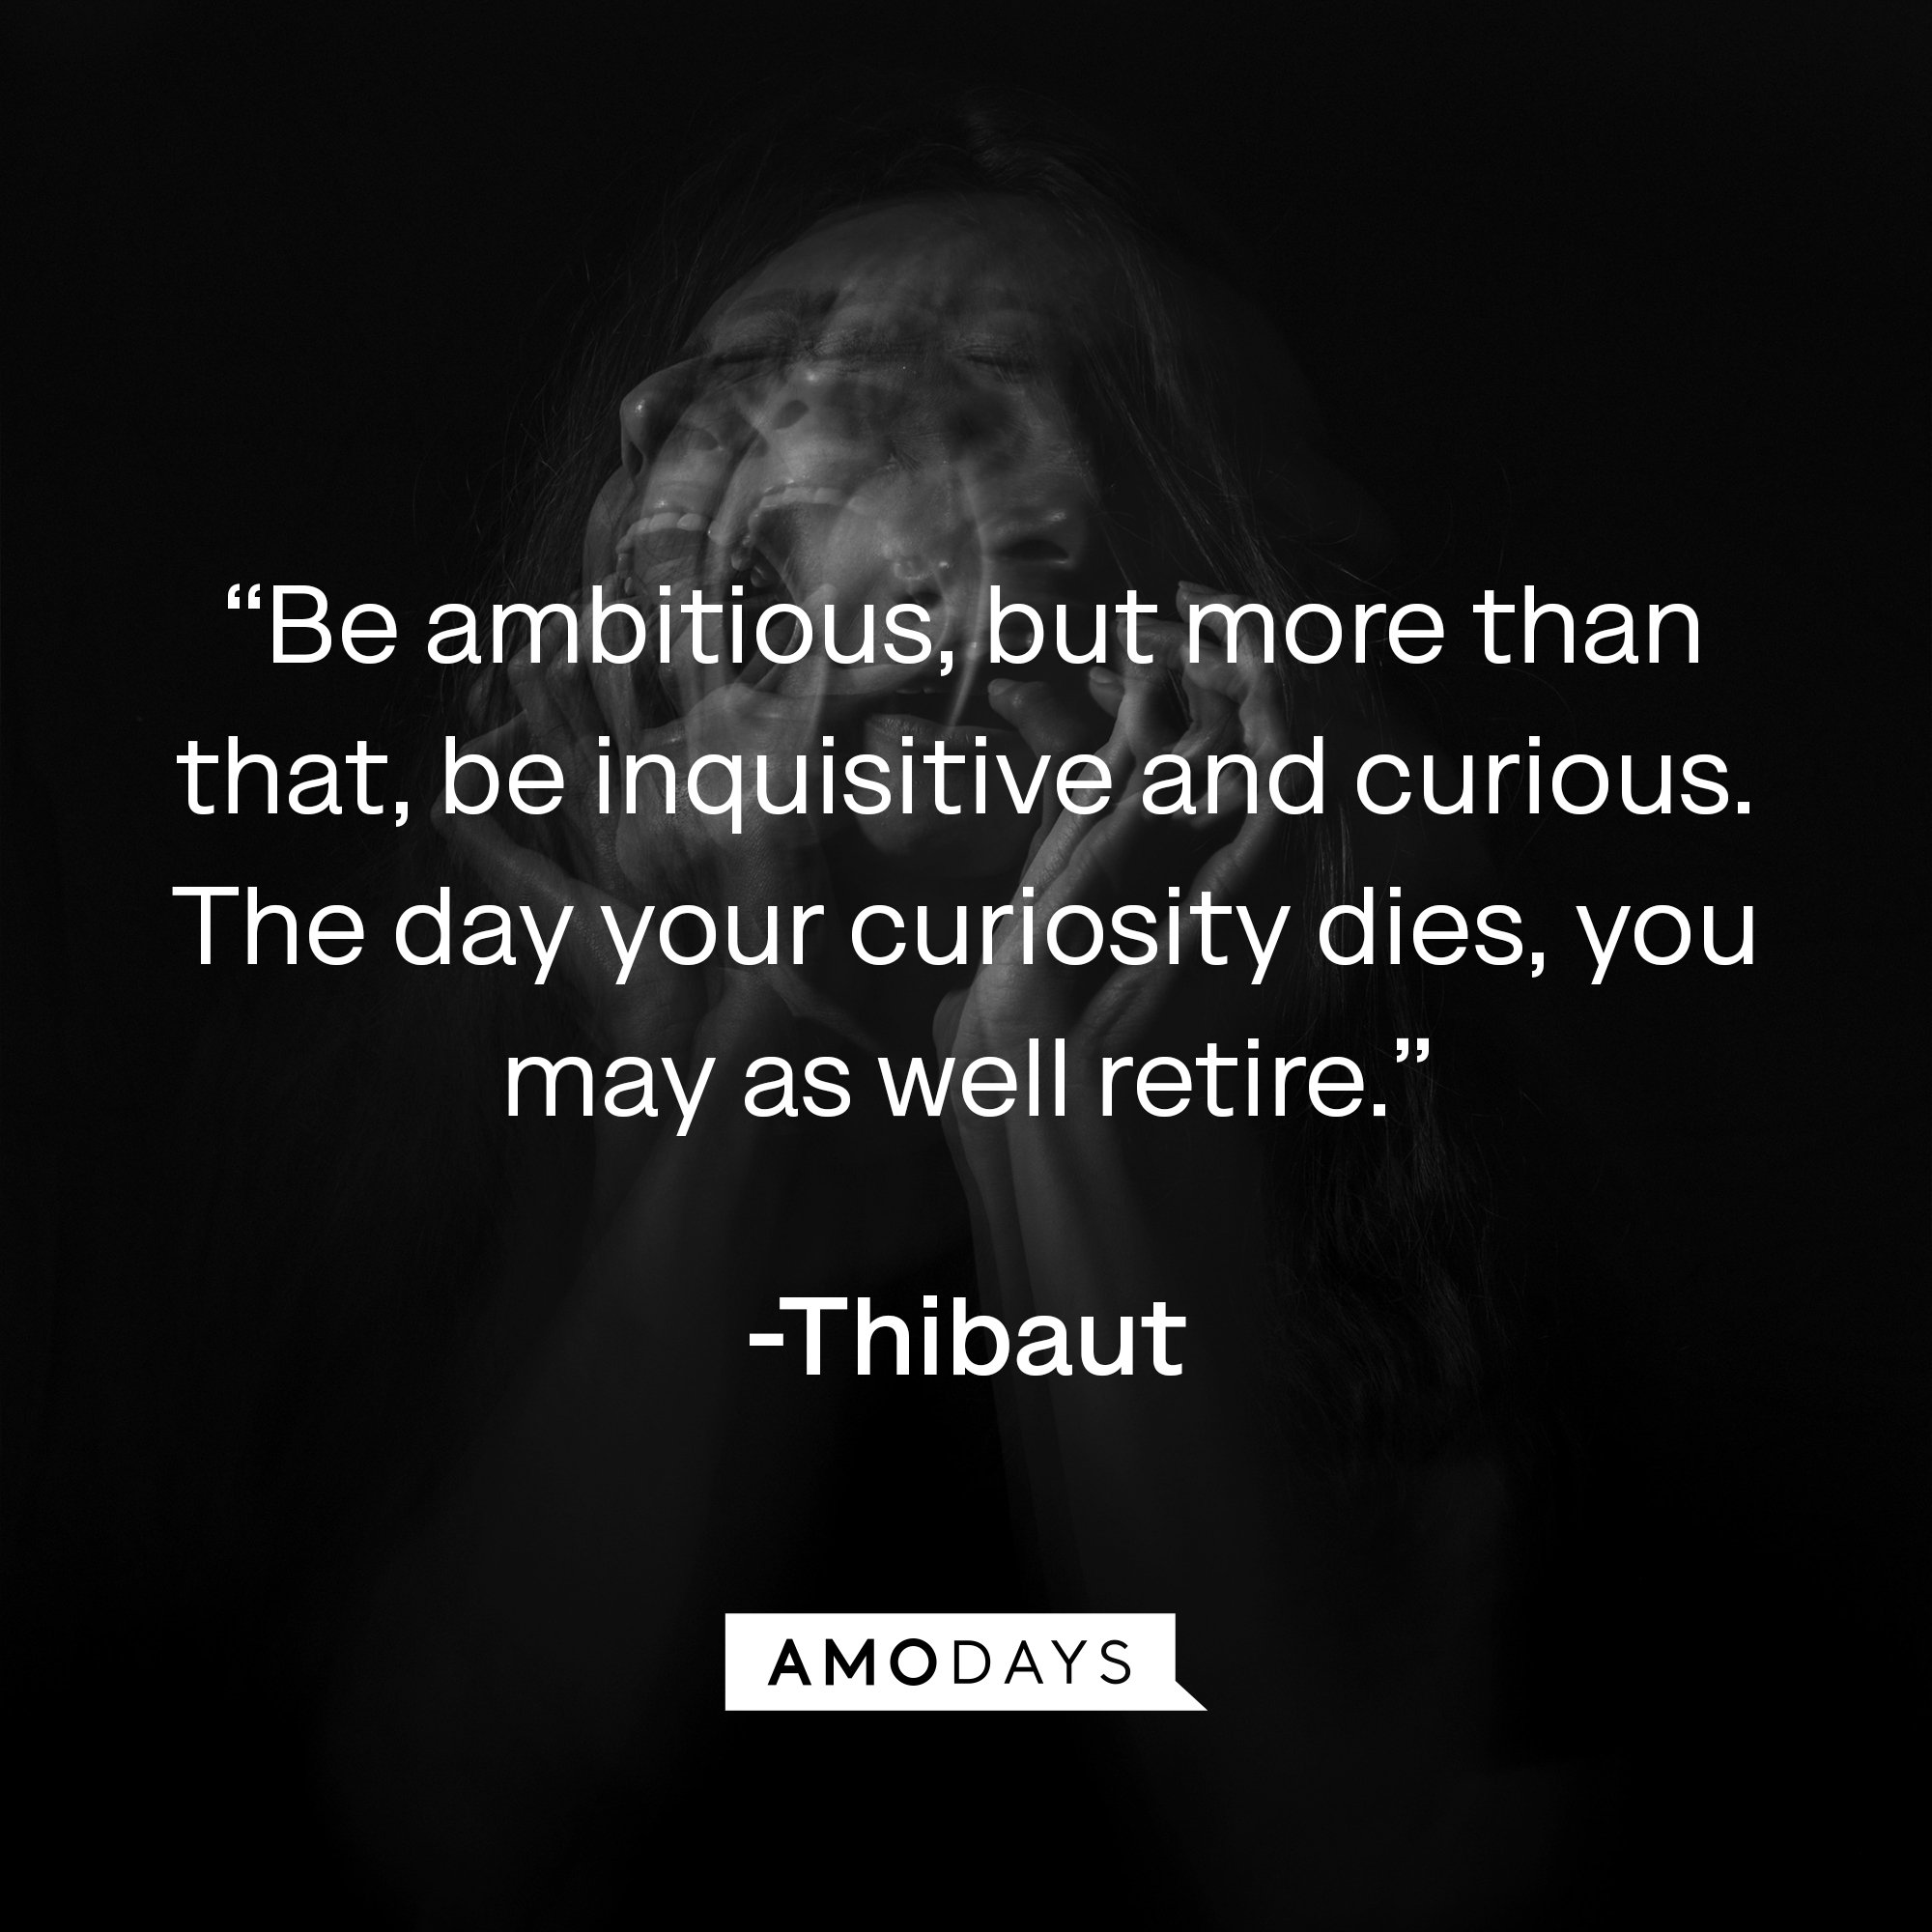  Thibaut's quote: “Be ambitious, but more than that, be inquisitive and curious. The day your curiosity dies, you may as well retire.” | Image: AmoDays